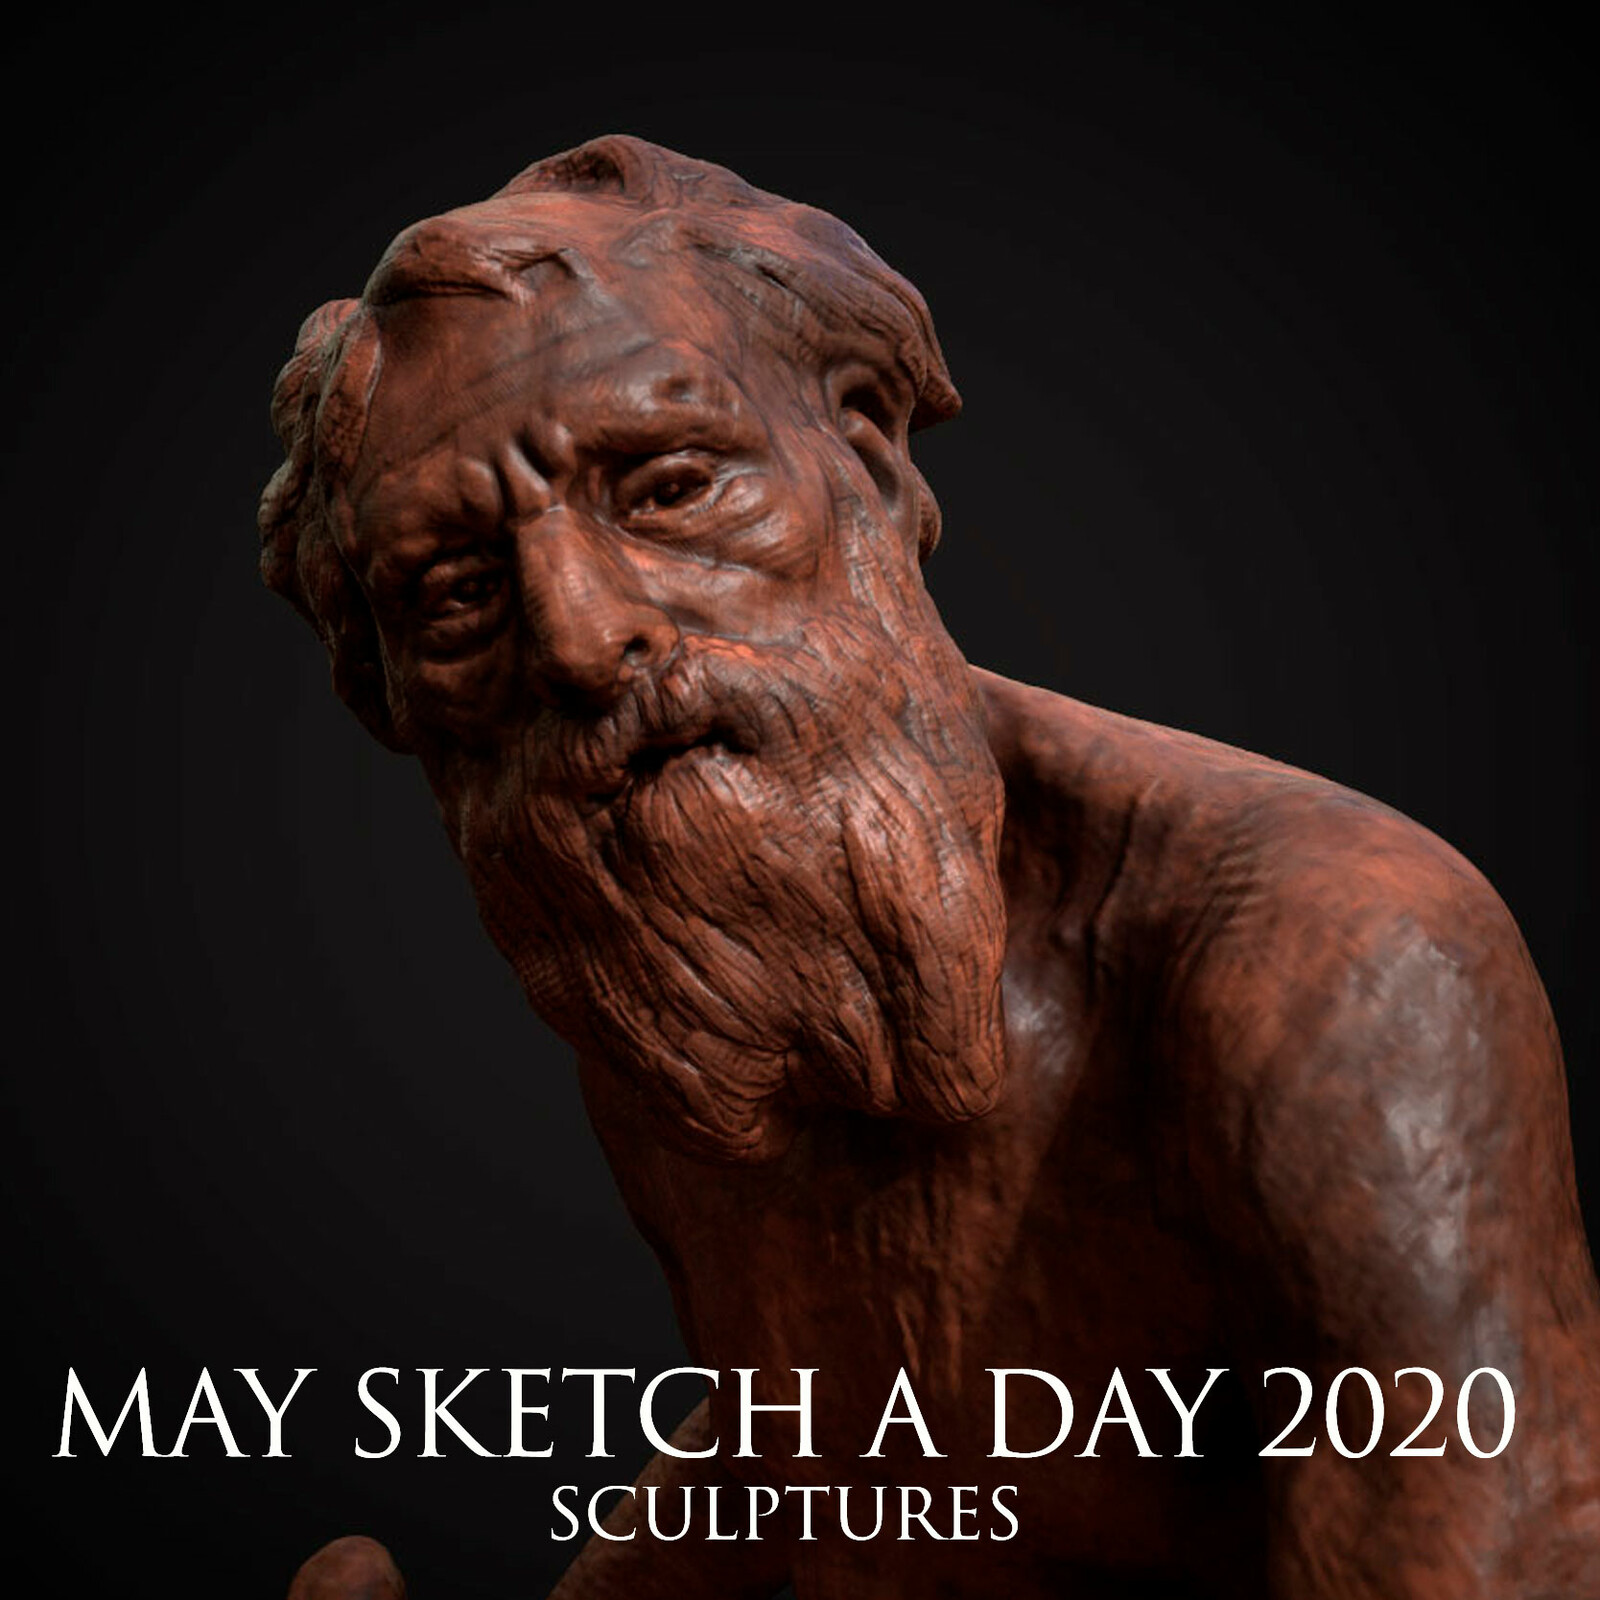 May Sketch a Day Sculptures